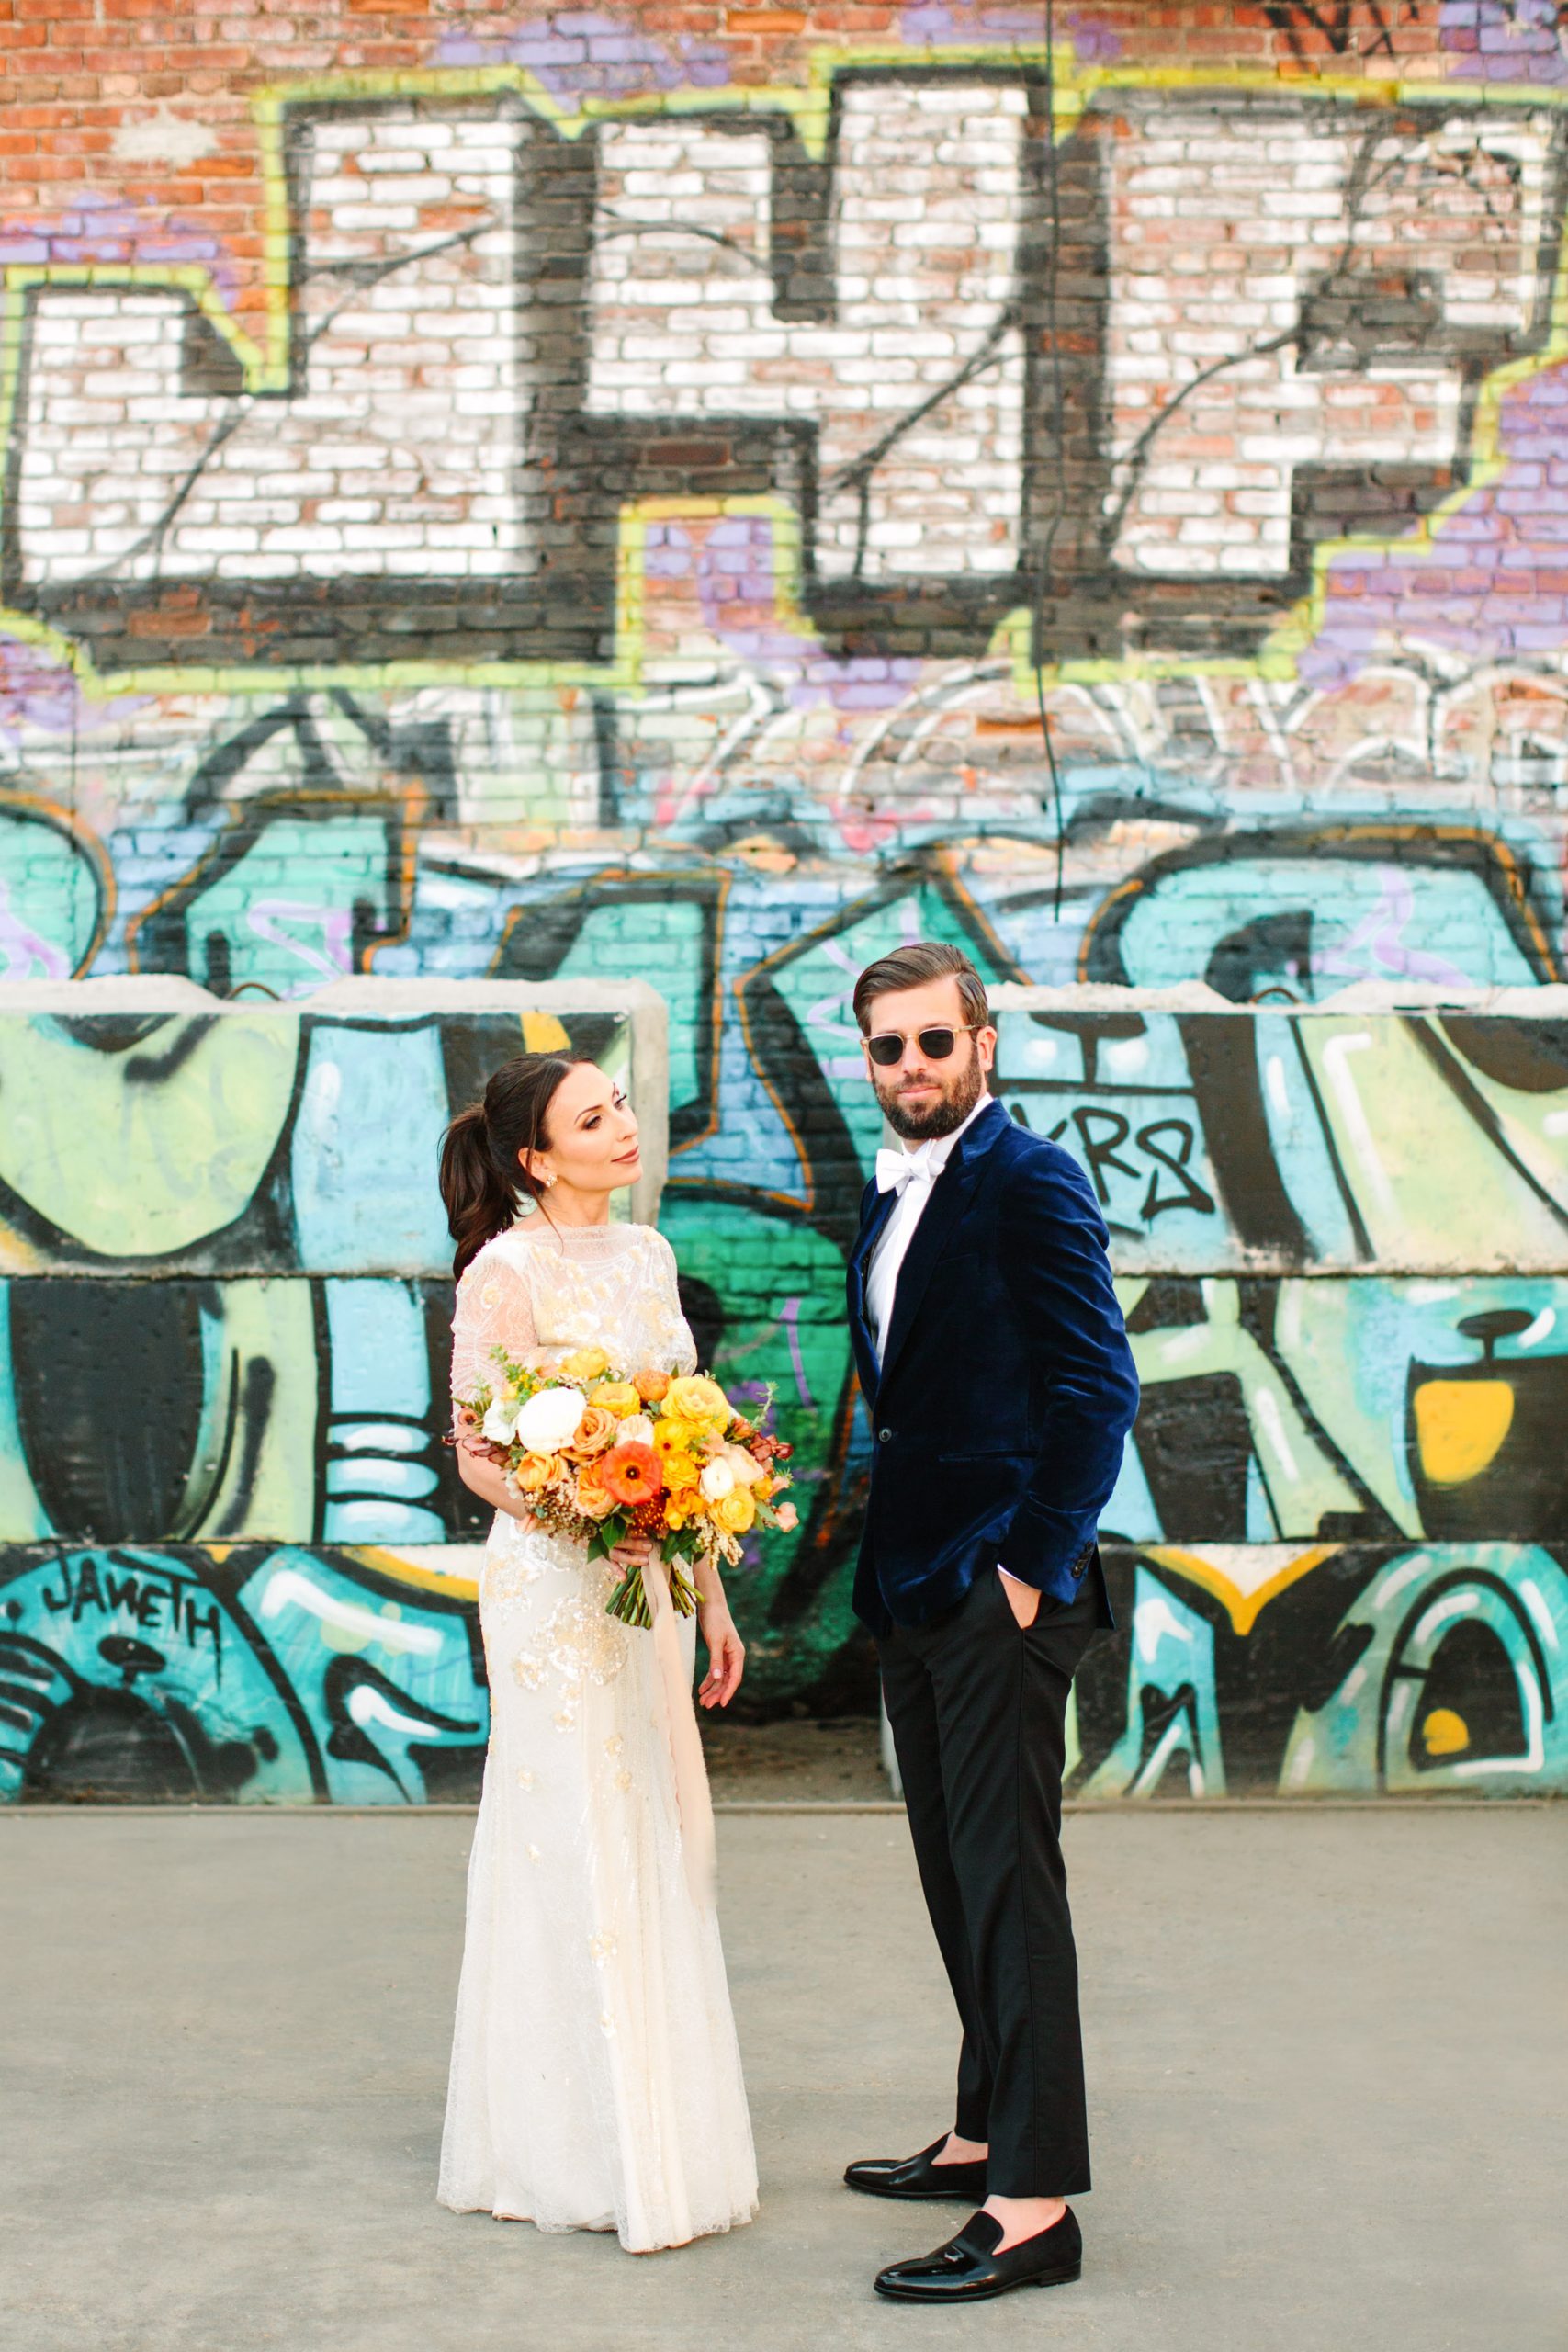 Bride and groom first look with graffiti backdrop www.marycostaweddings.com